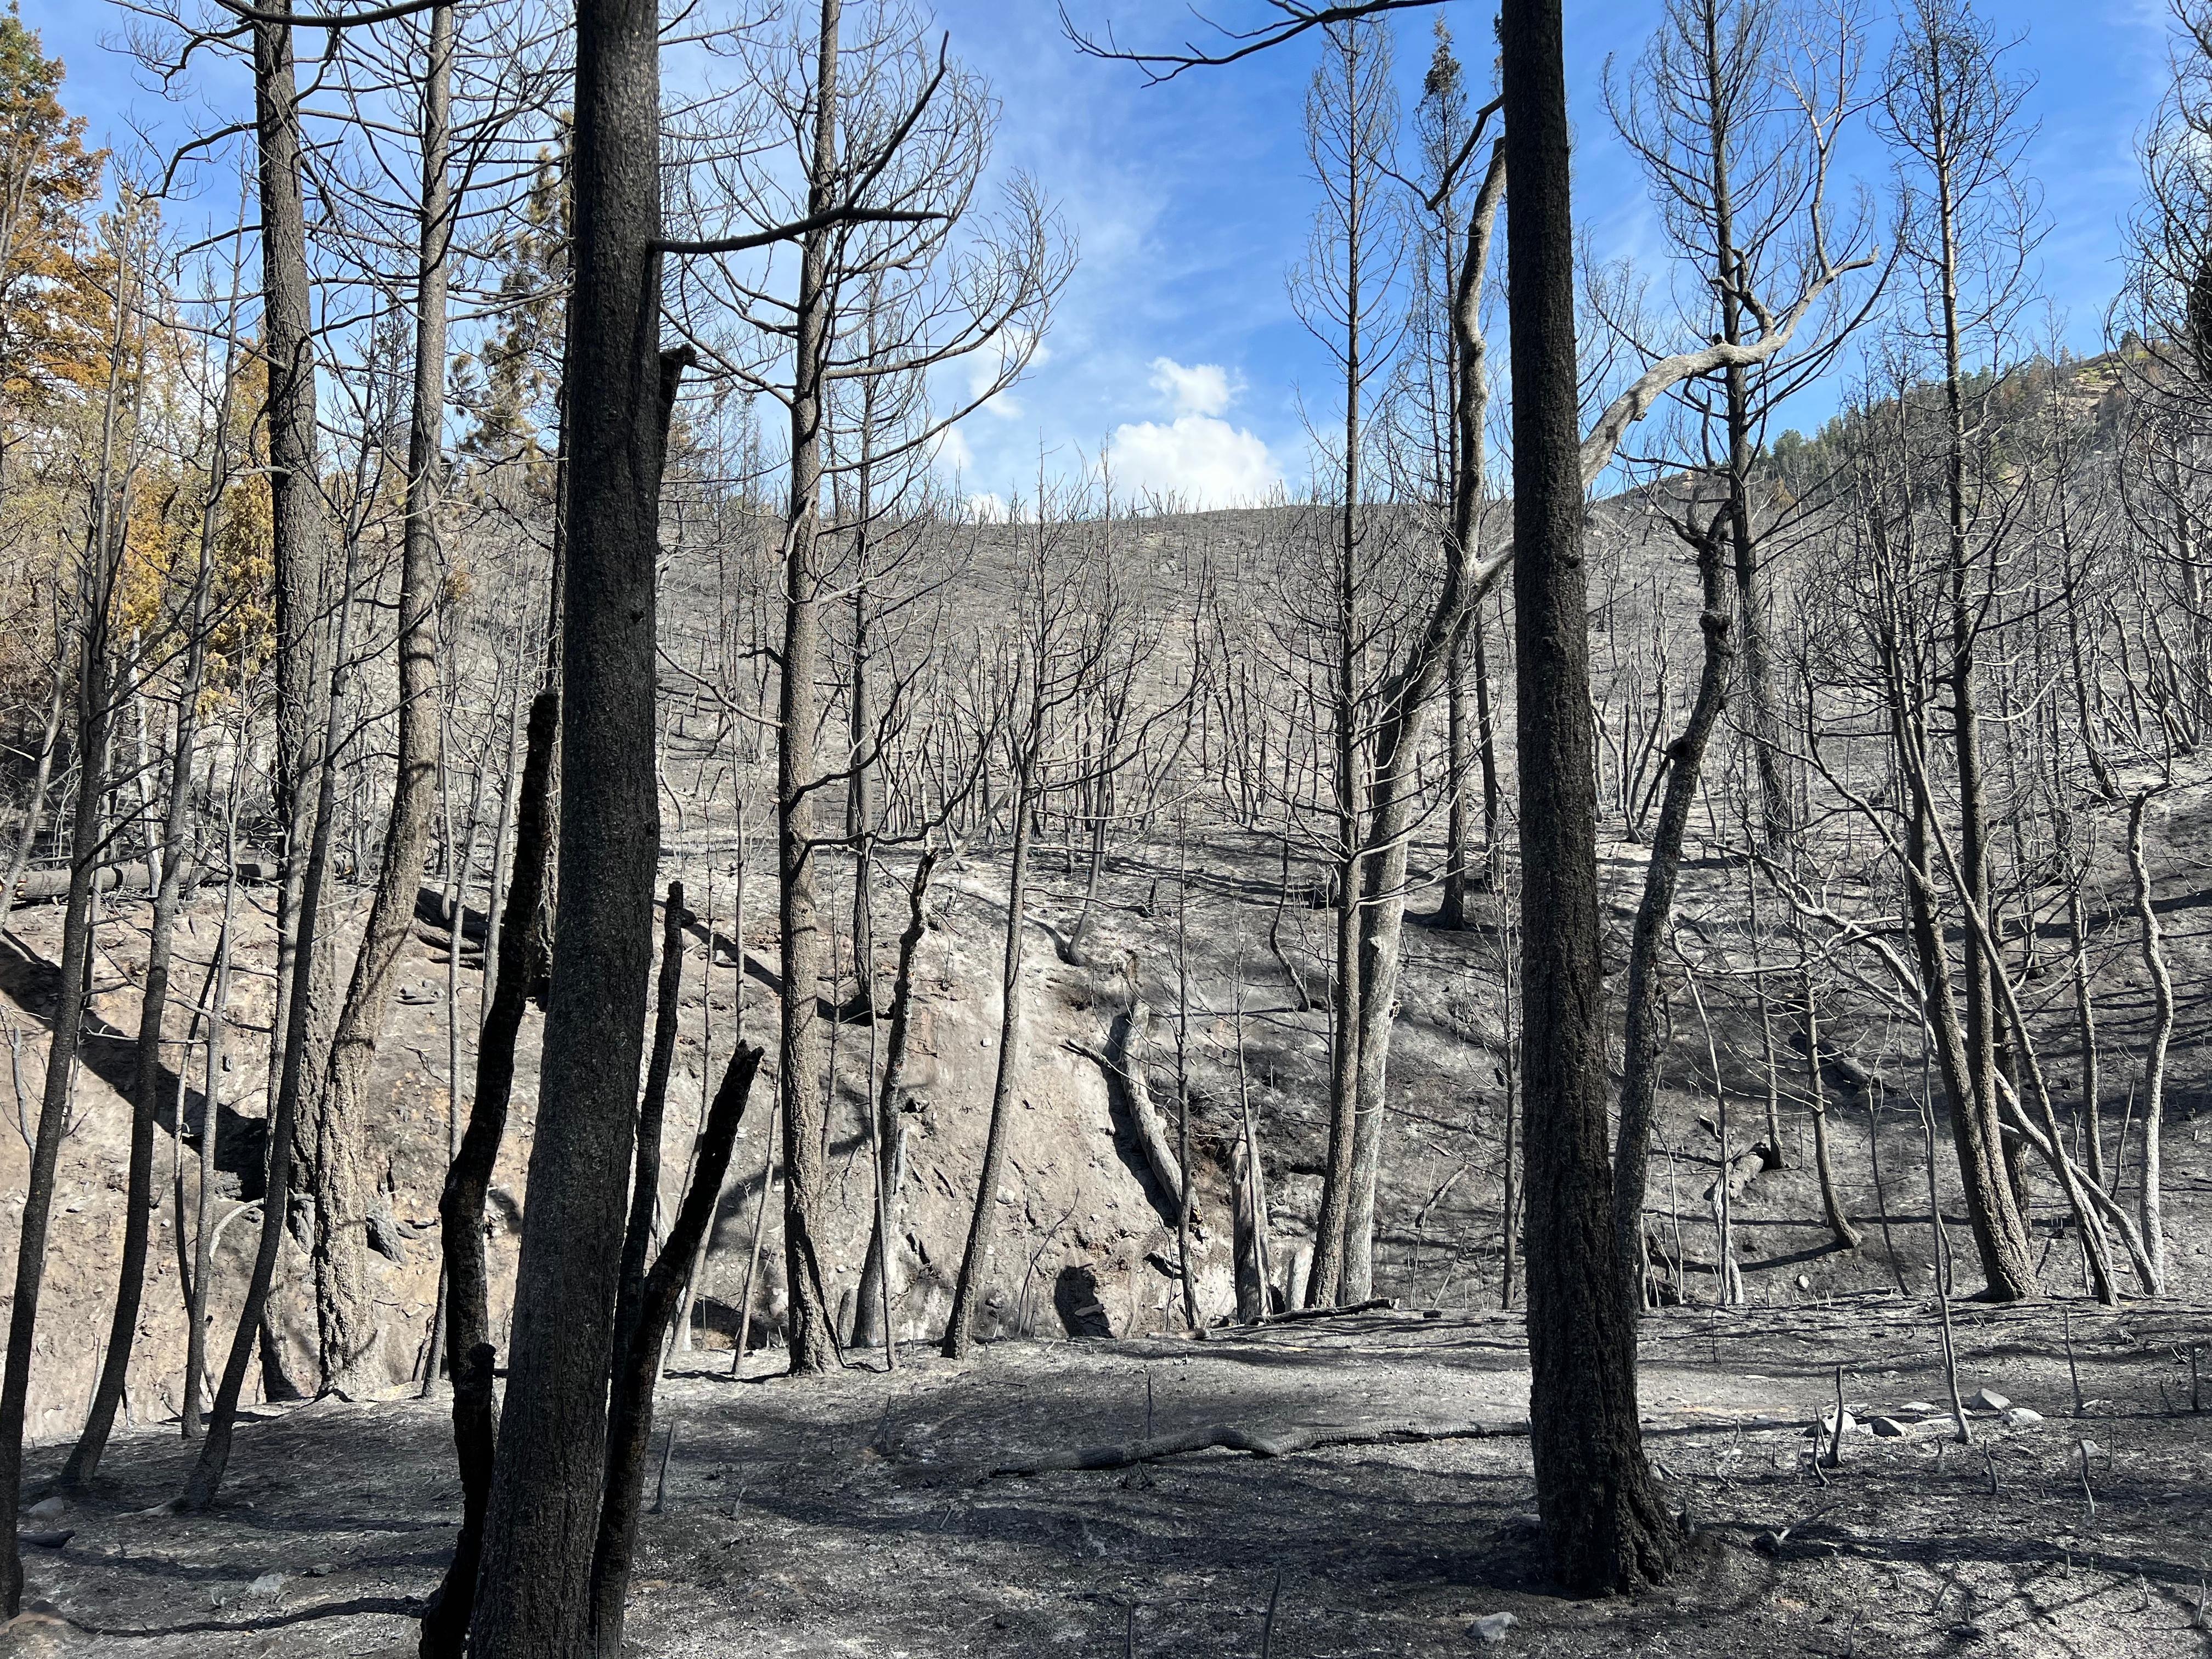 A second of a badly burned forest is shown, the ground is covered in ash and the remaining trees look like black sticks.